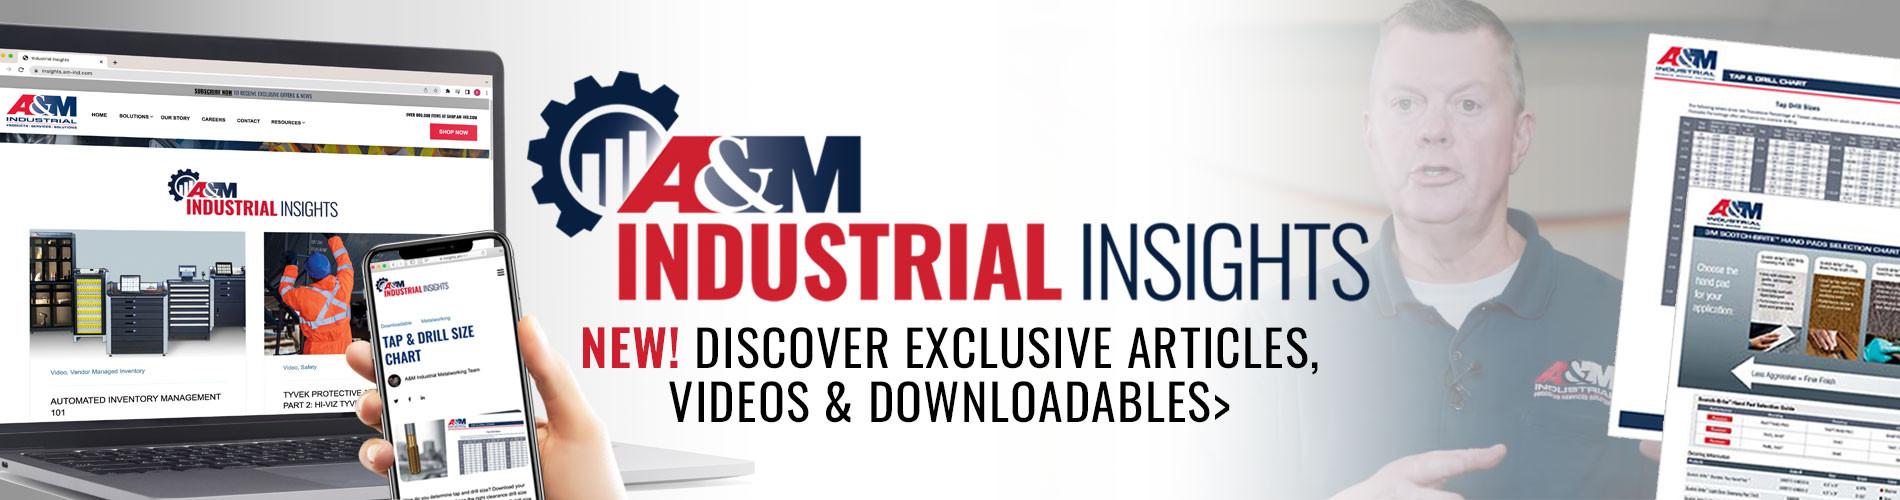 AMI-Industrial-Insights-Blog-WebX-Homepage